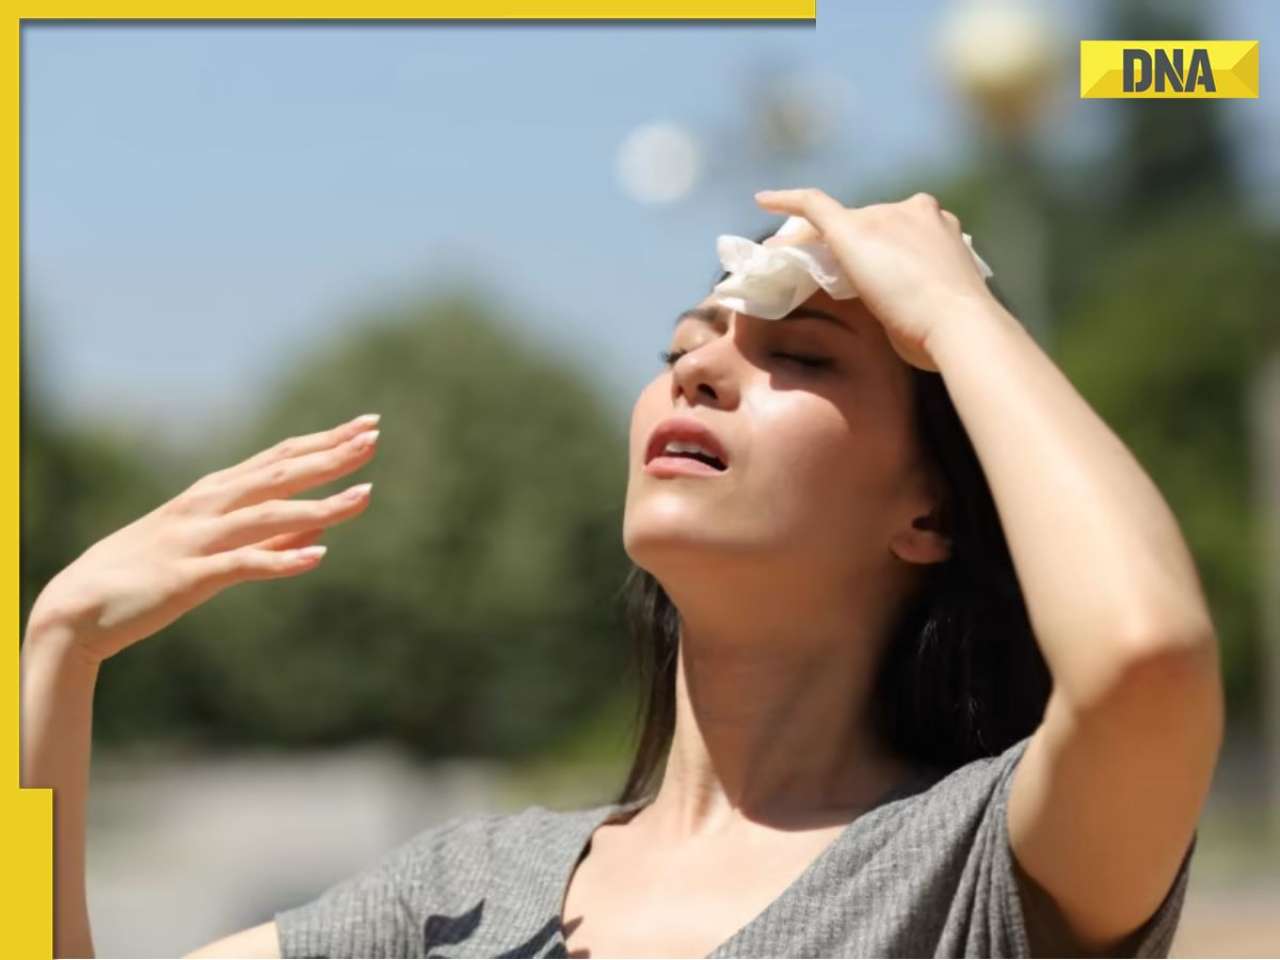 How to keep yourself protected from extreme heat, check out some dos and don'ts